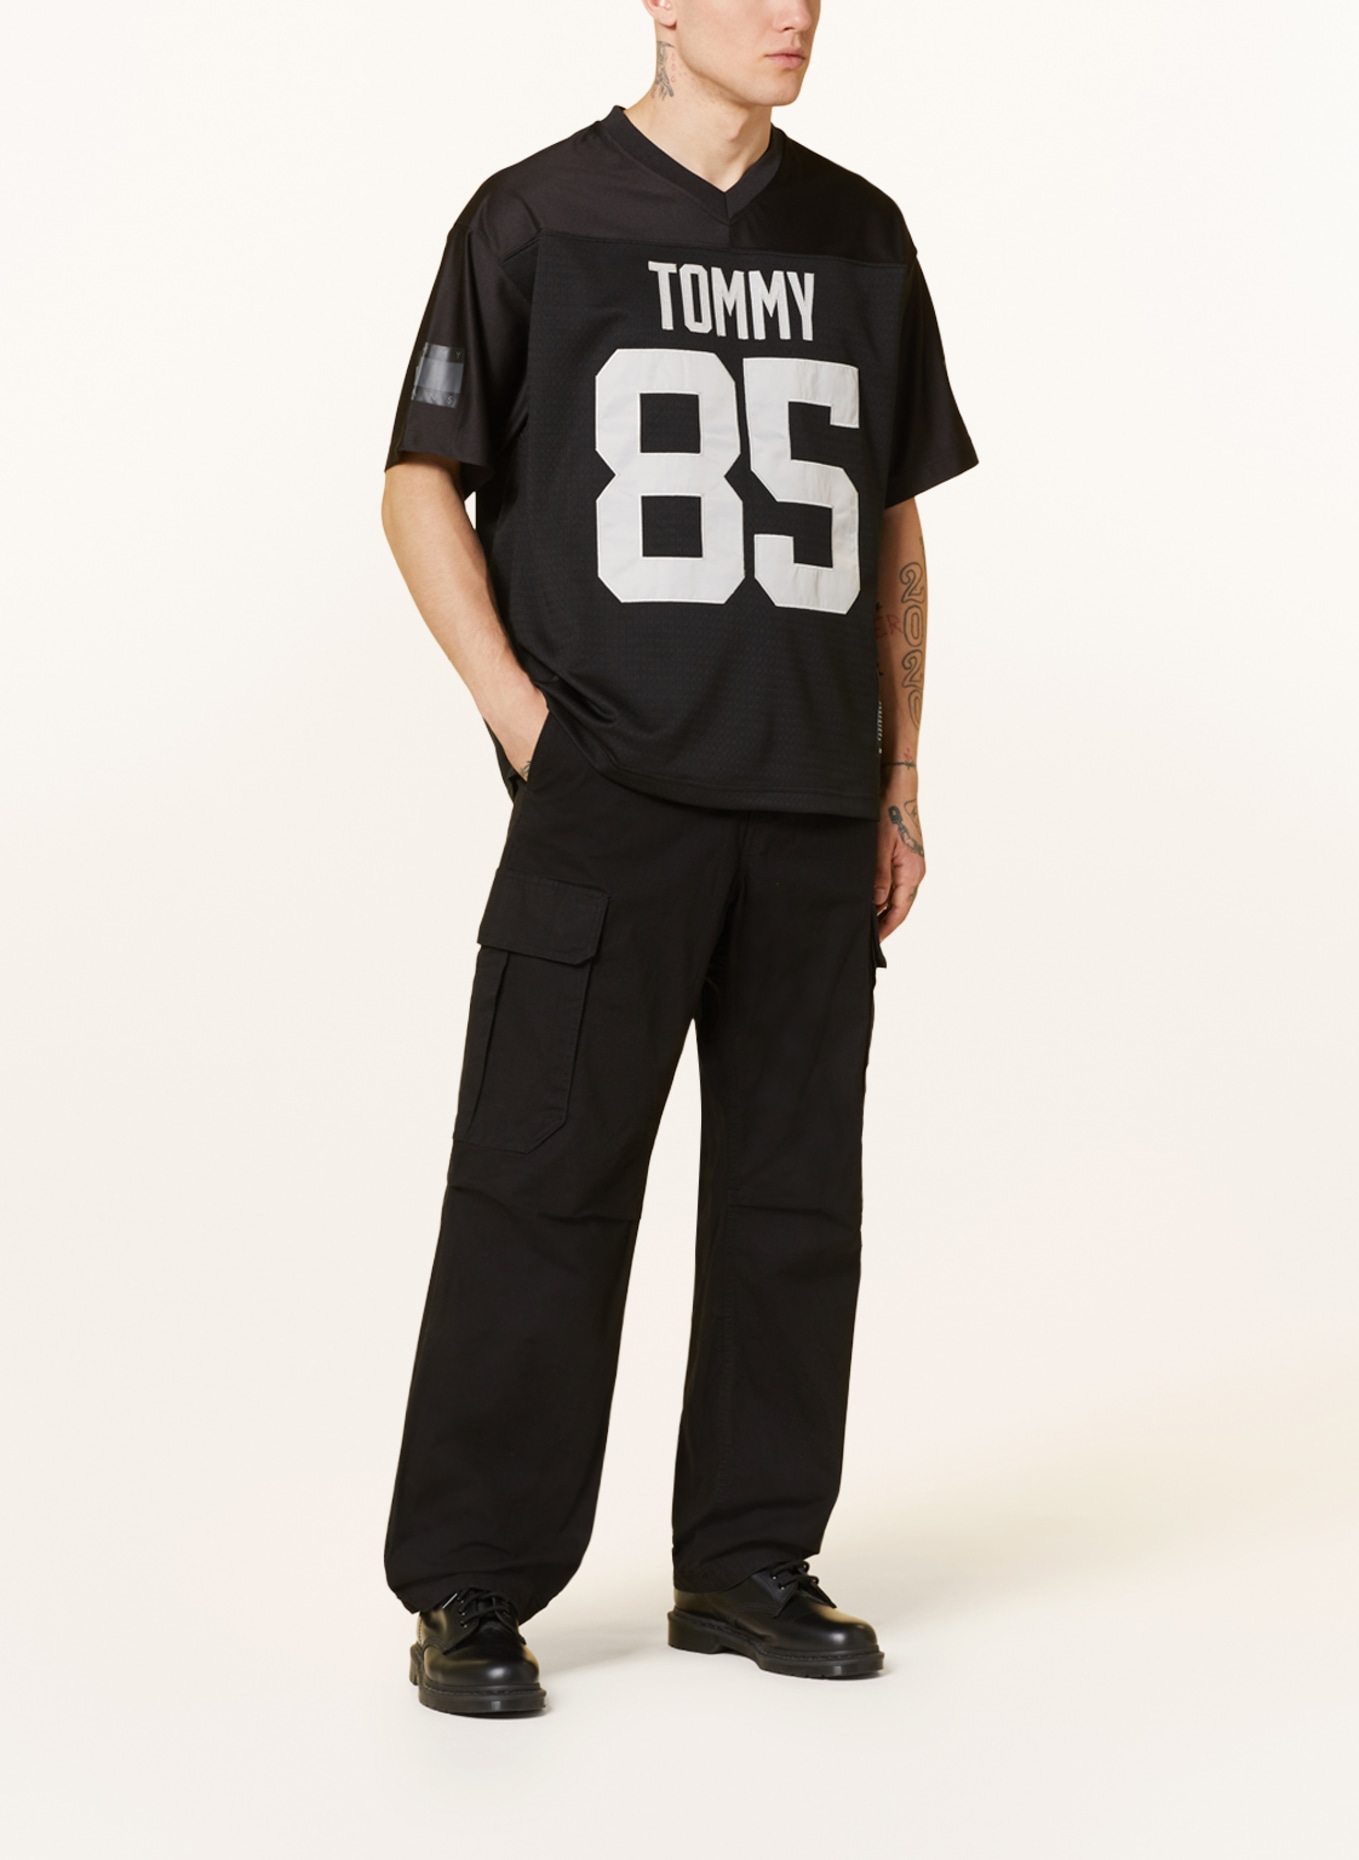 T-shirt black/ mesh made gray of JEANS TOMMY in